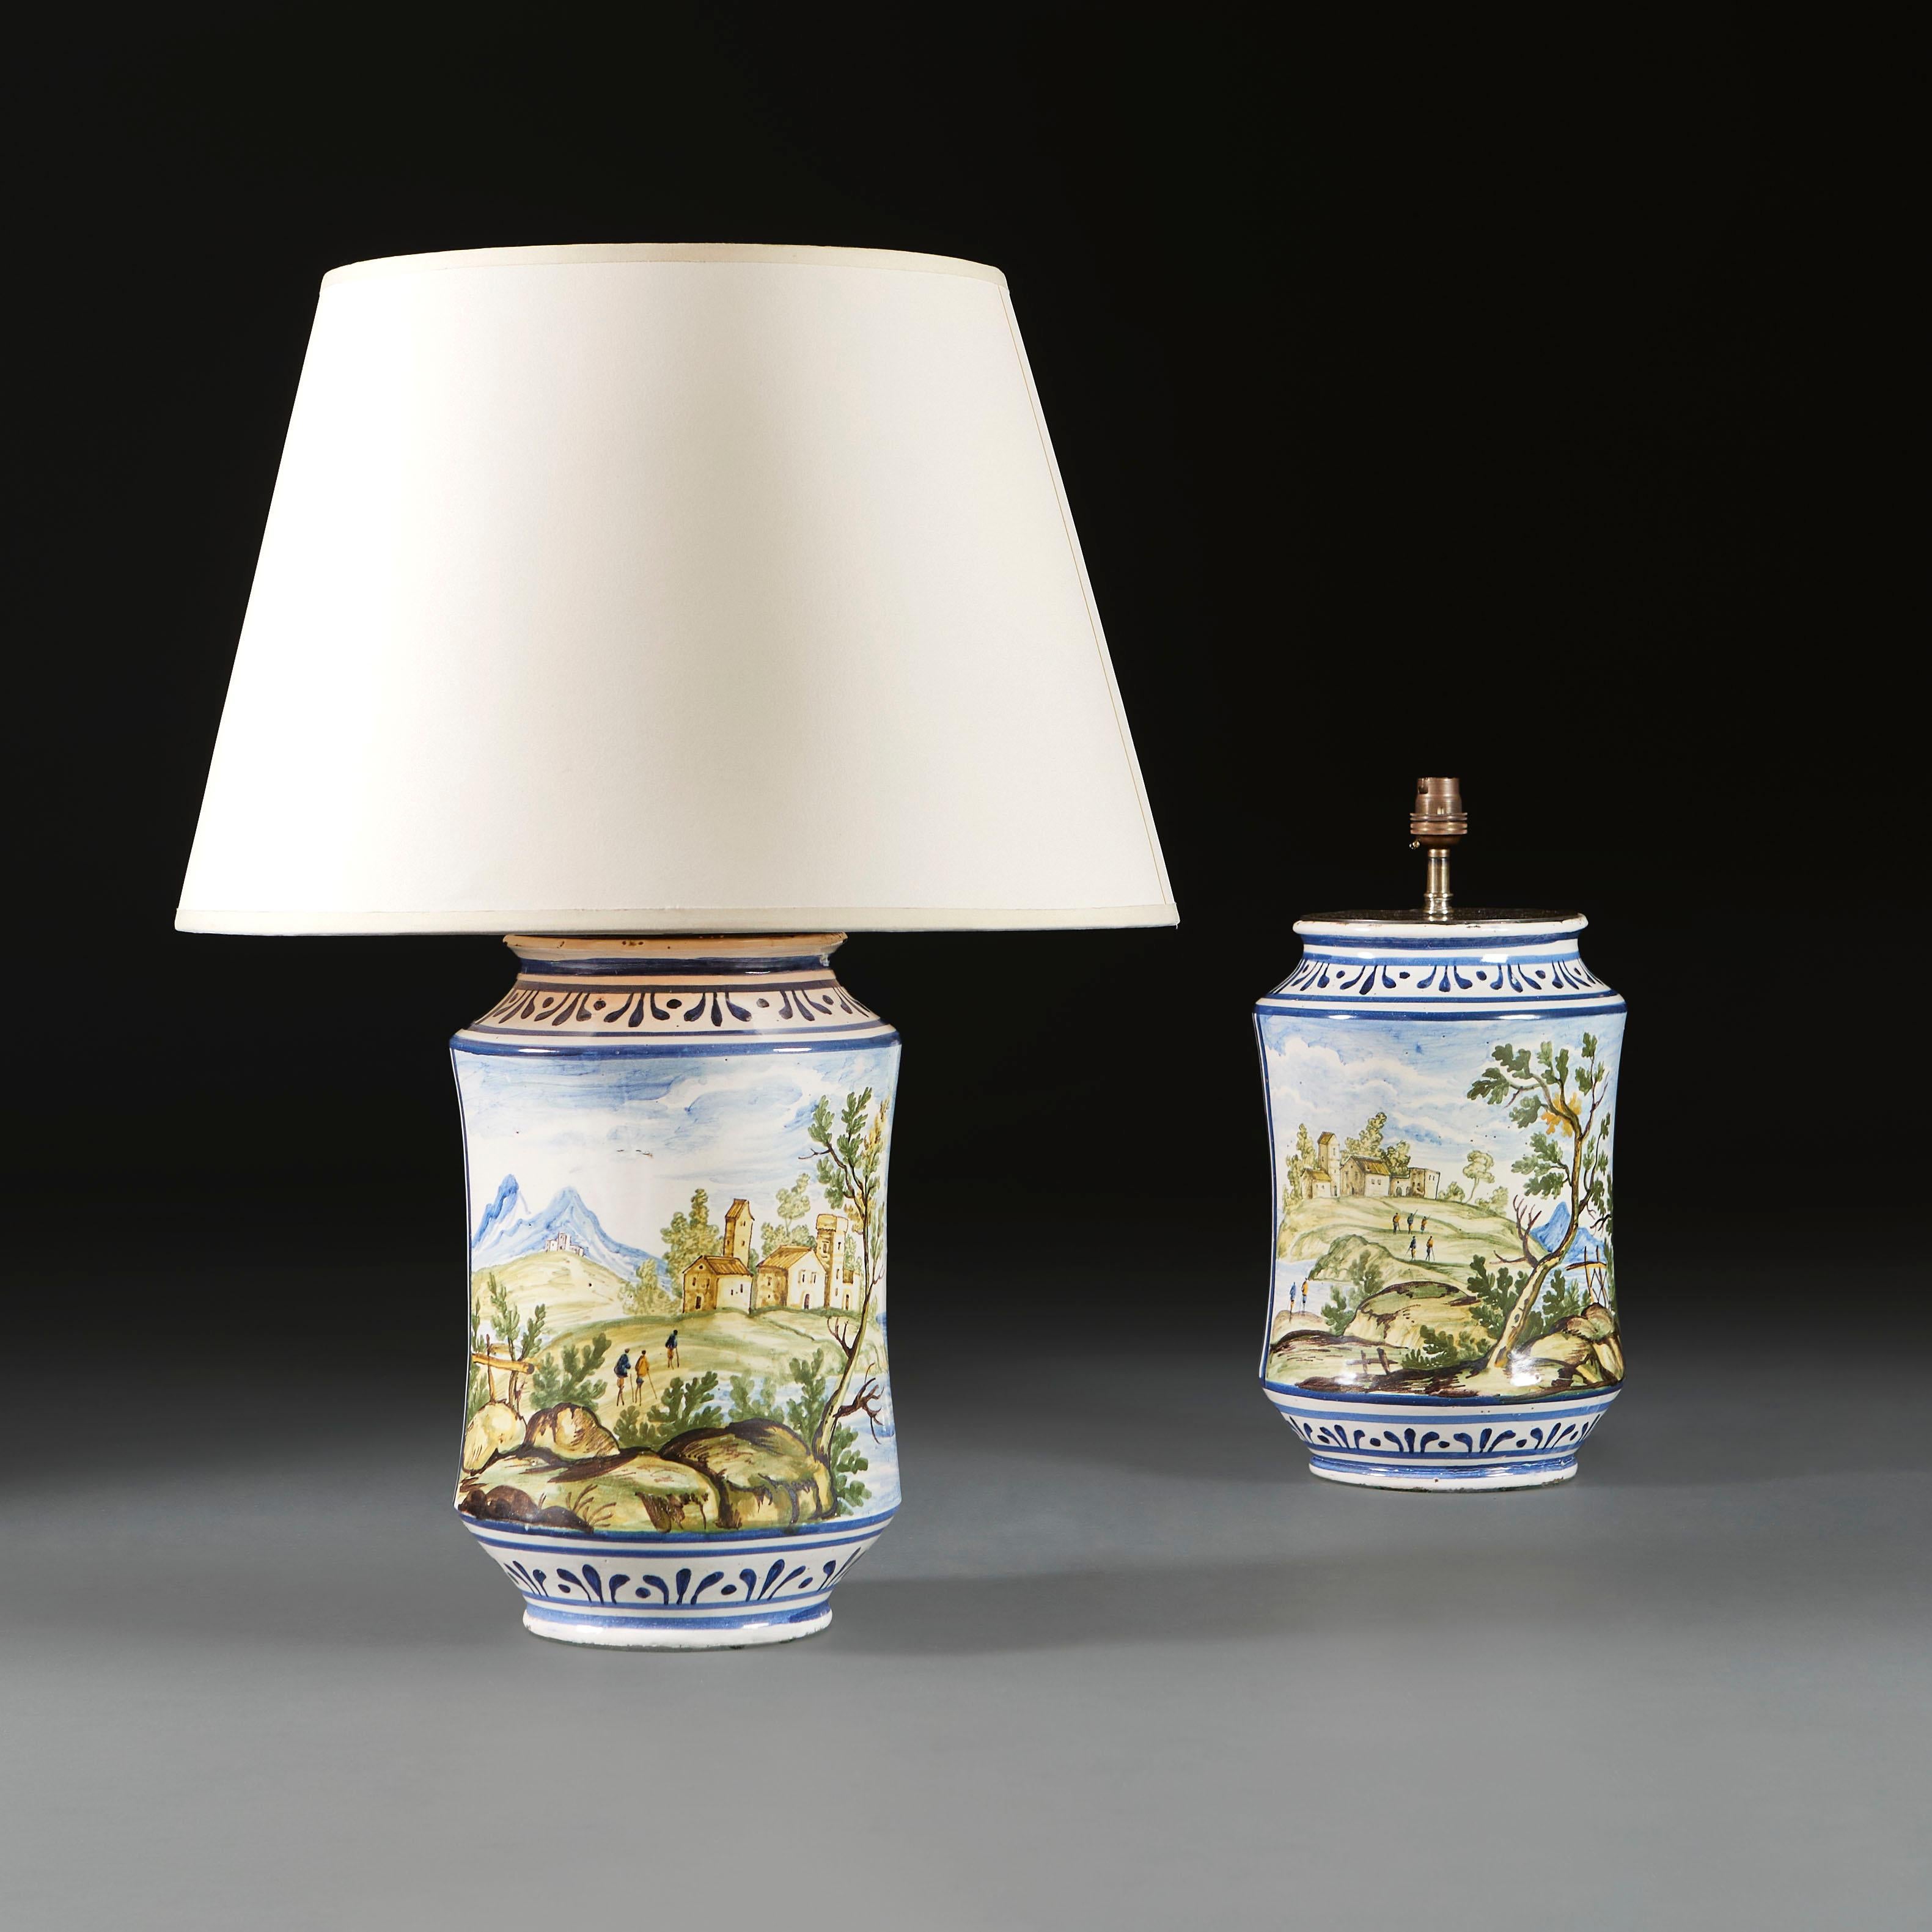 Italy, circa 1860

A fine pair of nineteenth century Albarello vases, painted with Arcadian scenes of Italian rural life, the backs painted with the letters ELV, now mounted as lamps.

Photographed with 18” diameter pale cream card Pembroke